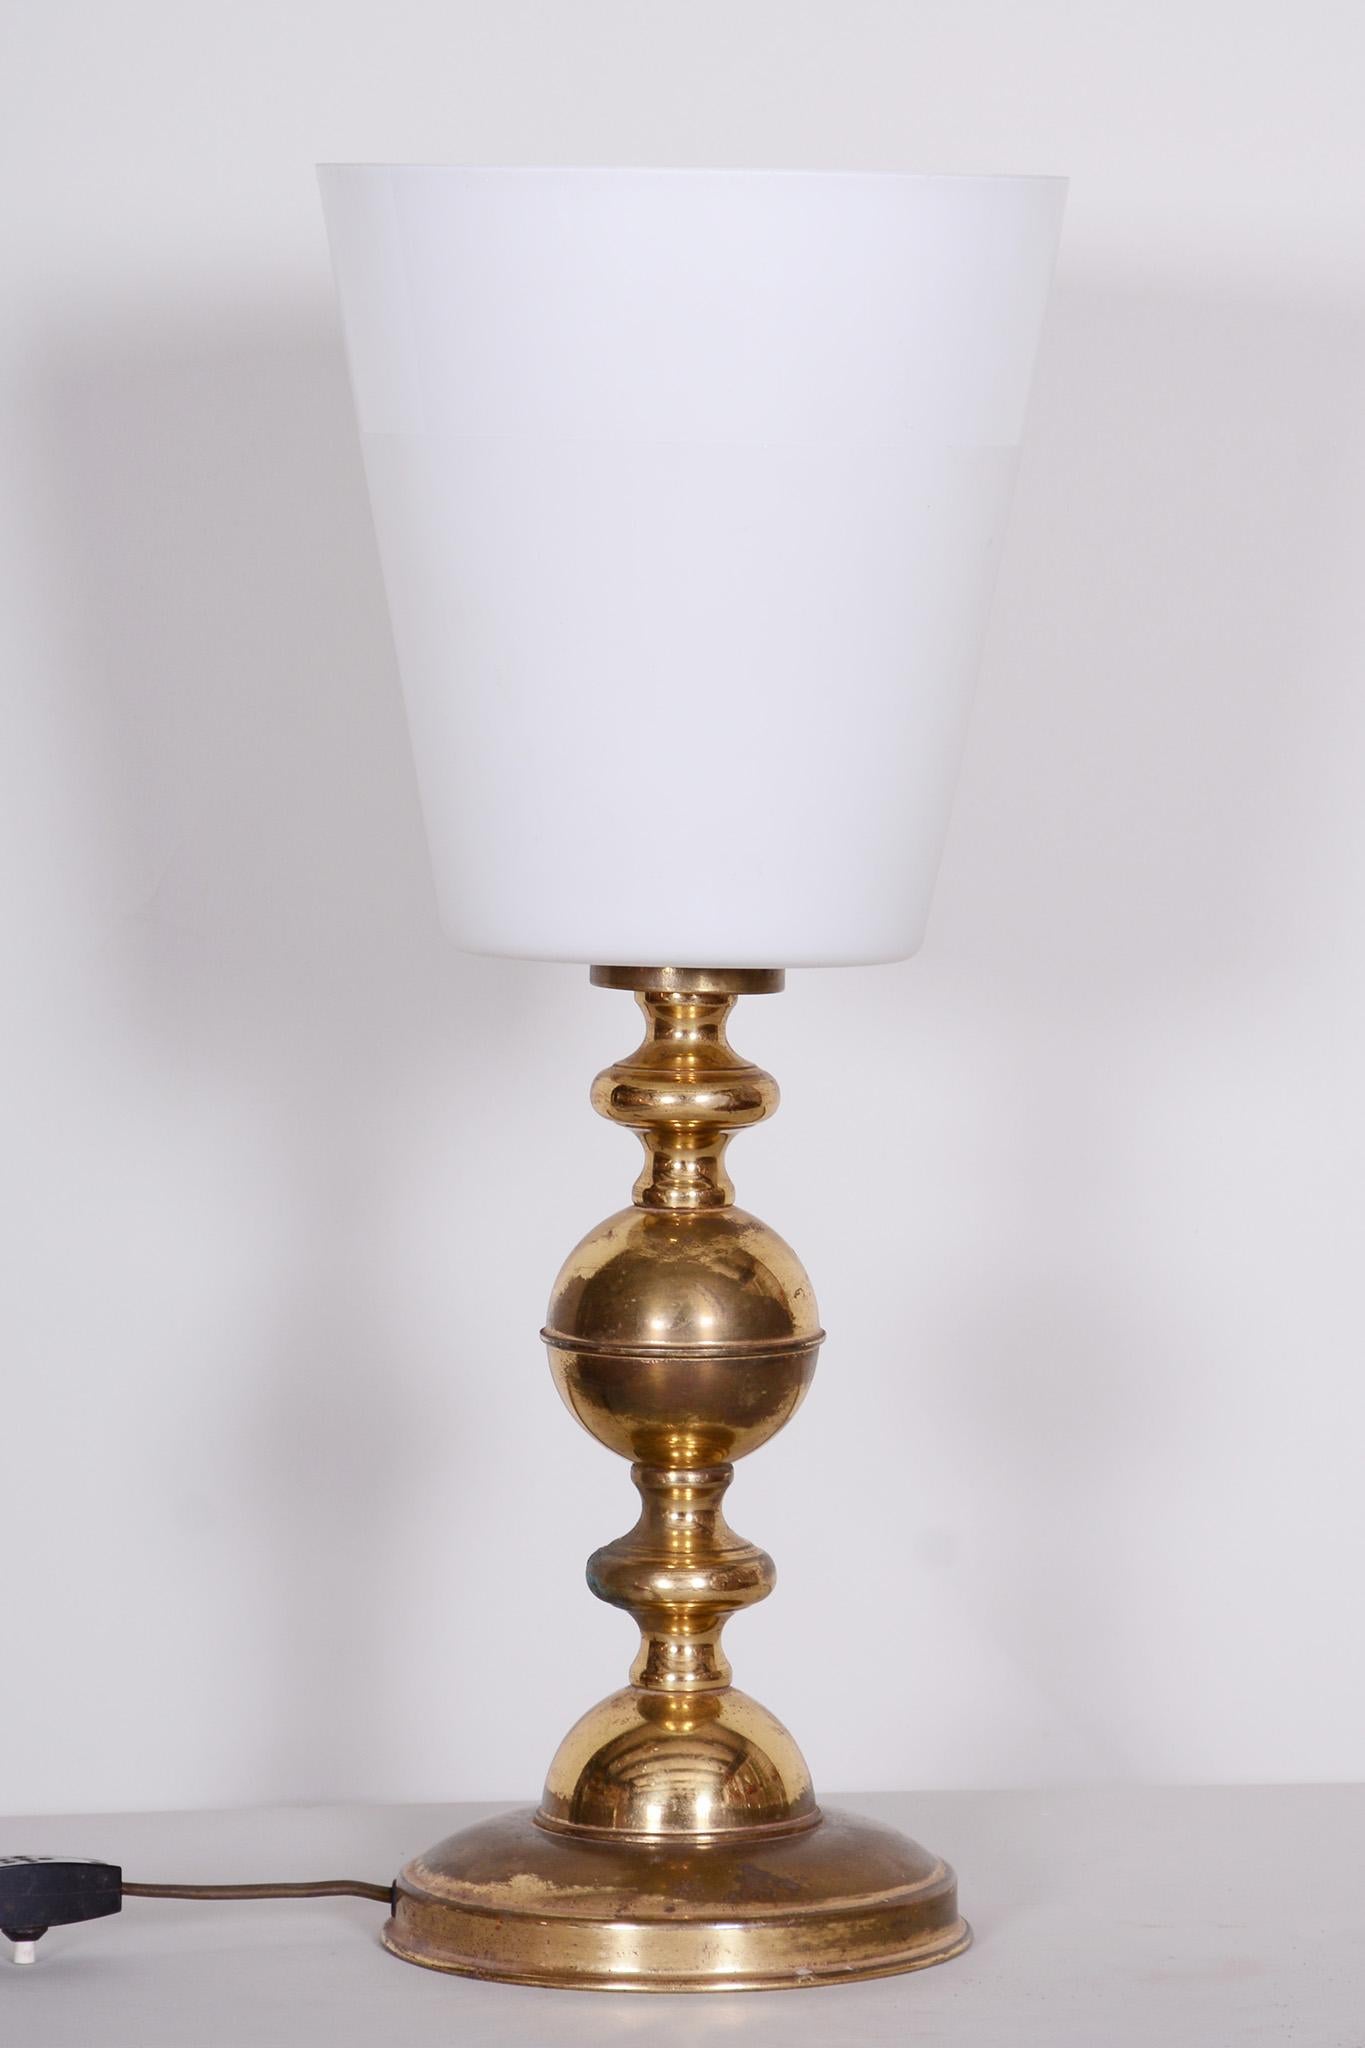 Mid-Century Modern Midcentury Table Lamp, Milk Glass and Brass, Fully Functional, Czechia, 1960s For Sale